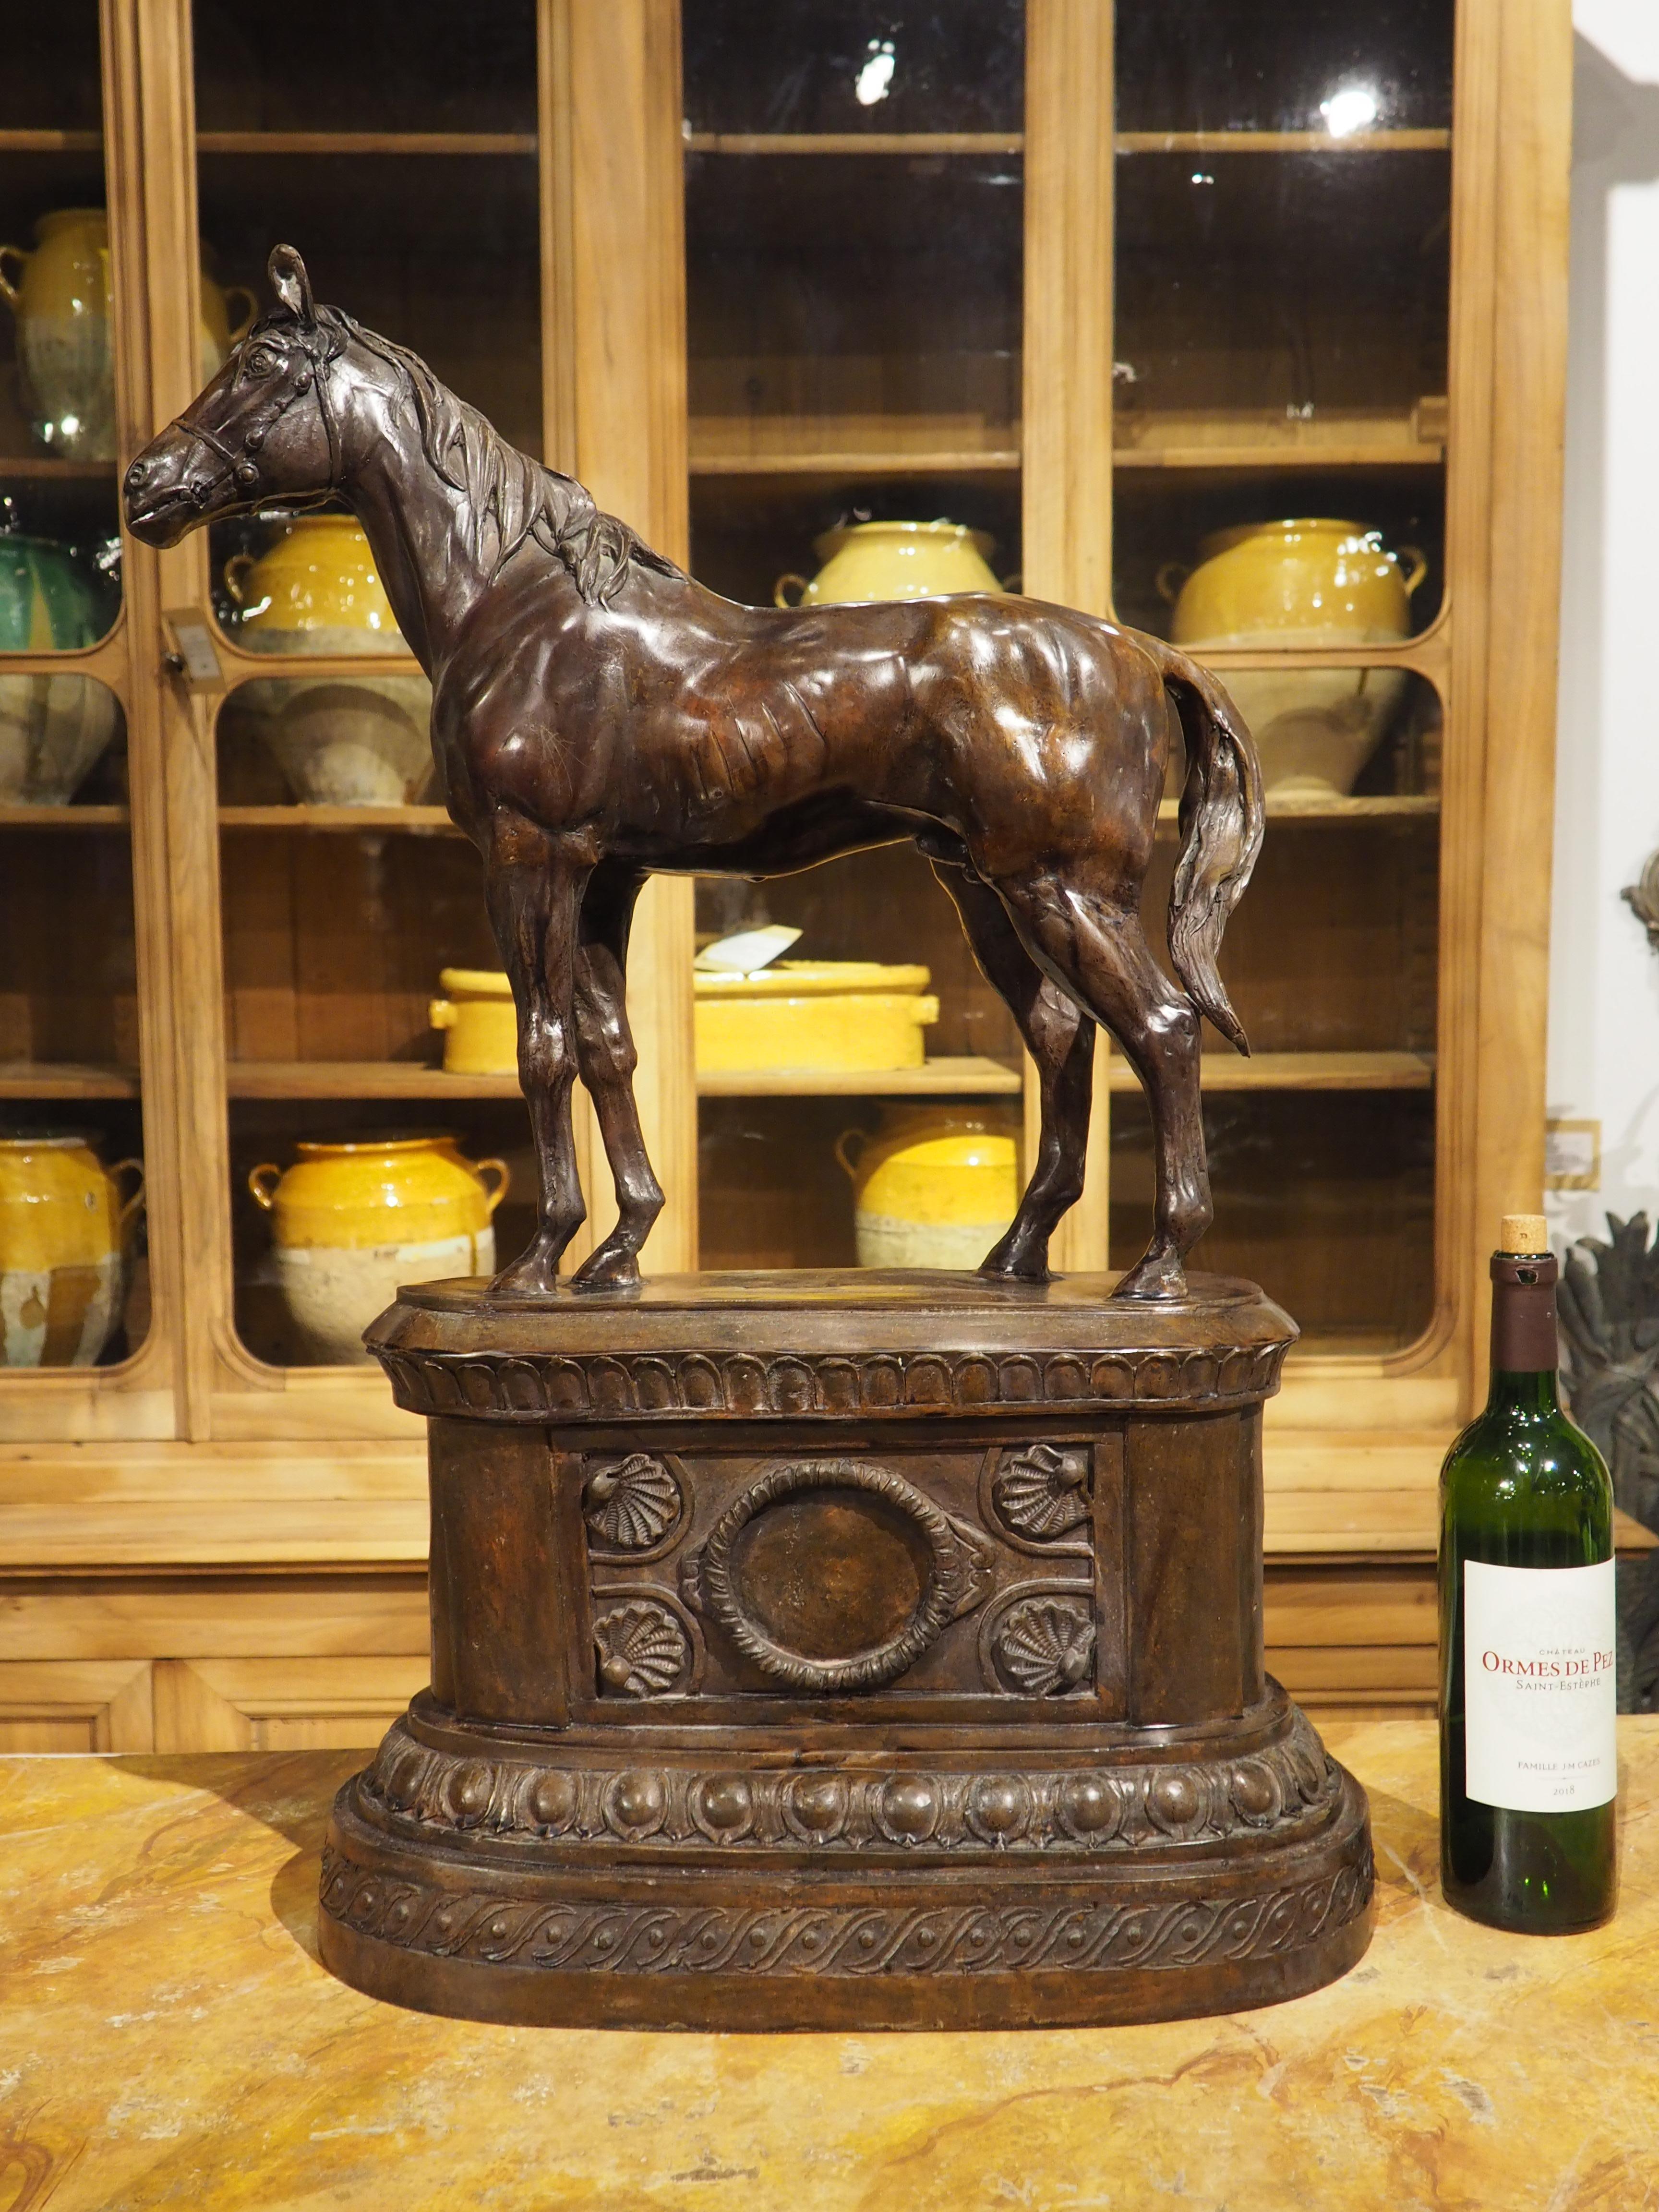 Cast in the 1900s, this bronze sculpture of a horse on a pedestal has a lovely patination that accentuates the standing stallion. Clad with a bridle and bit, but no other dressing, the majestic horse has a long, flowing mane that lays flat as he